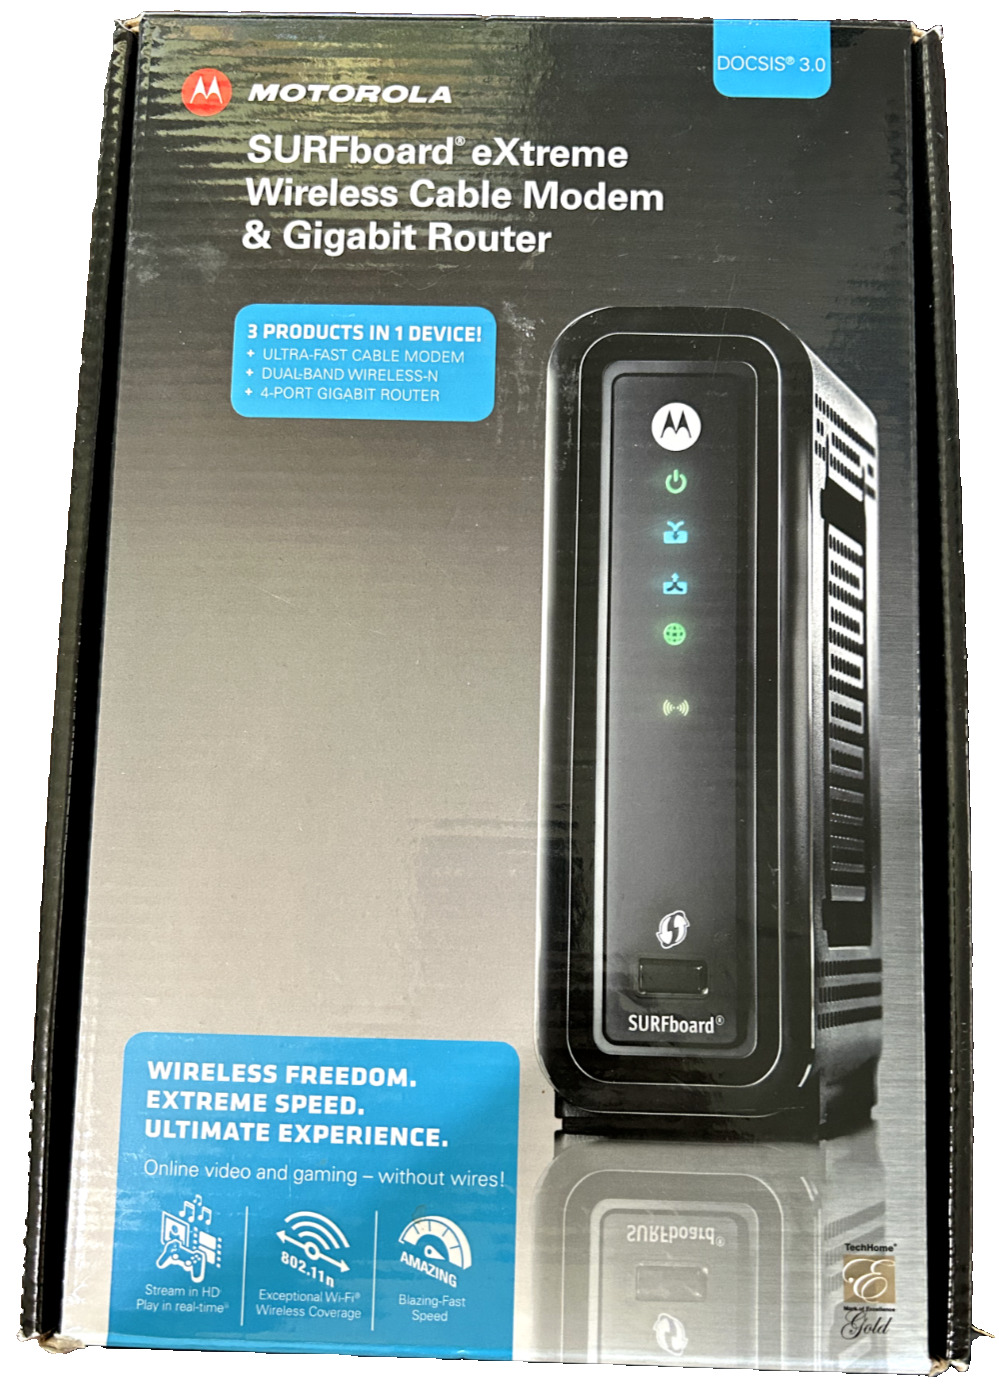 Motorola ARRIS SURFboard SBG6580 DOCSIS 3.0 Cable Modem Wi-Fi Router N300 NEW